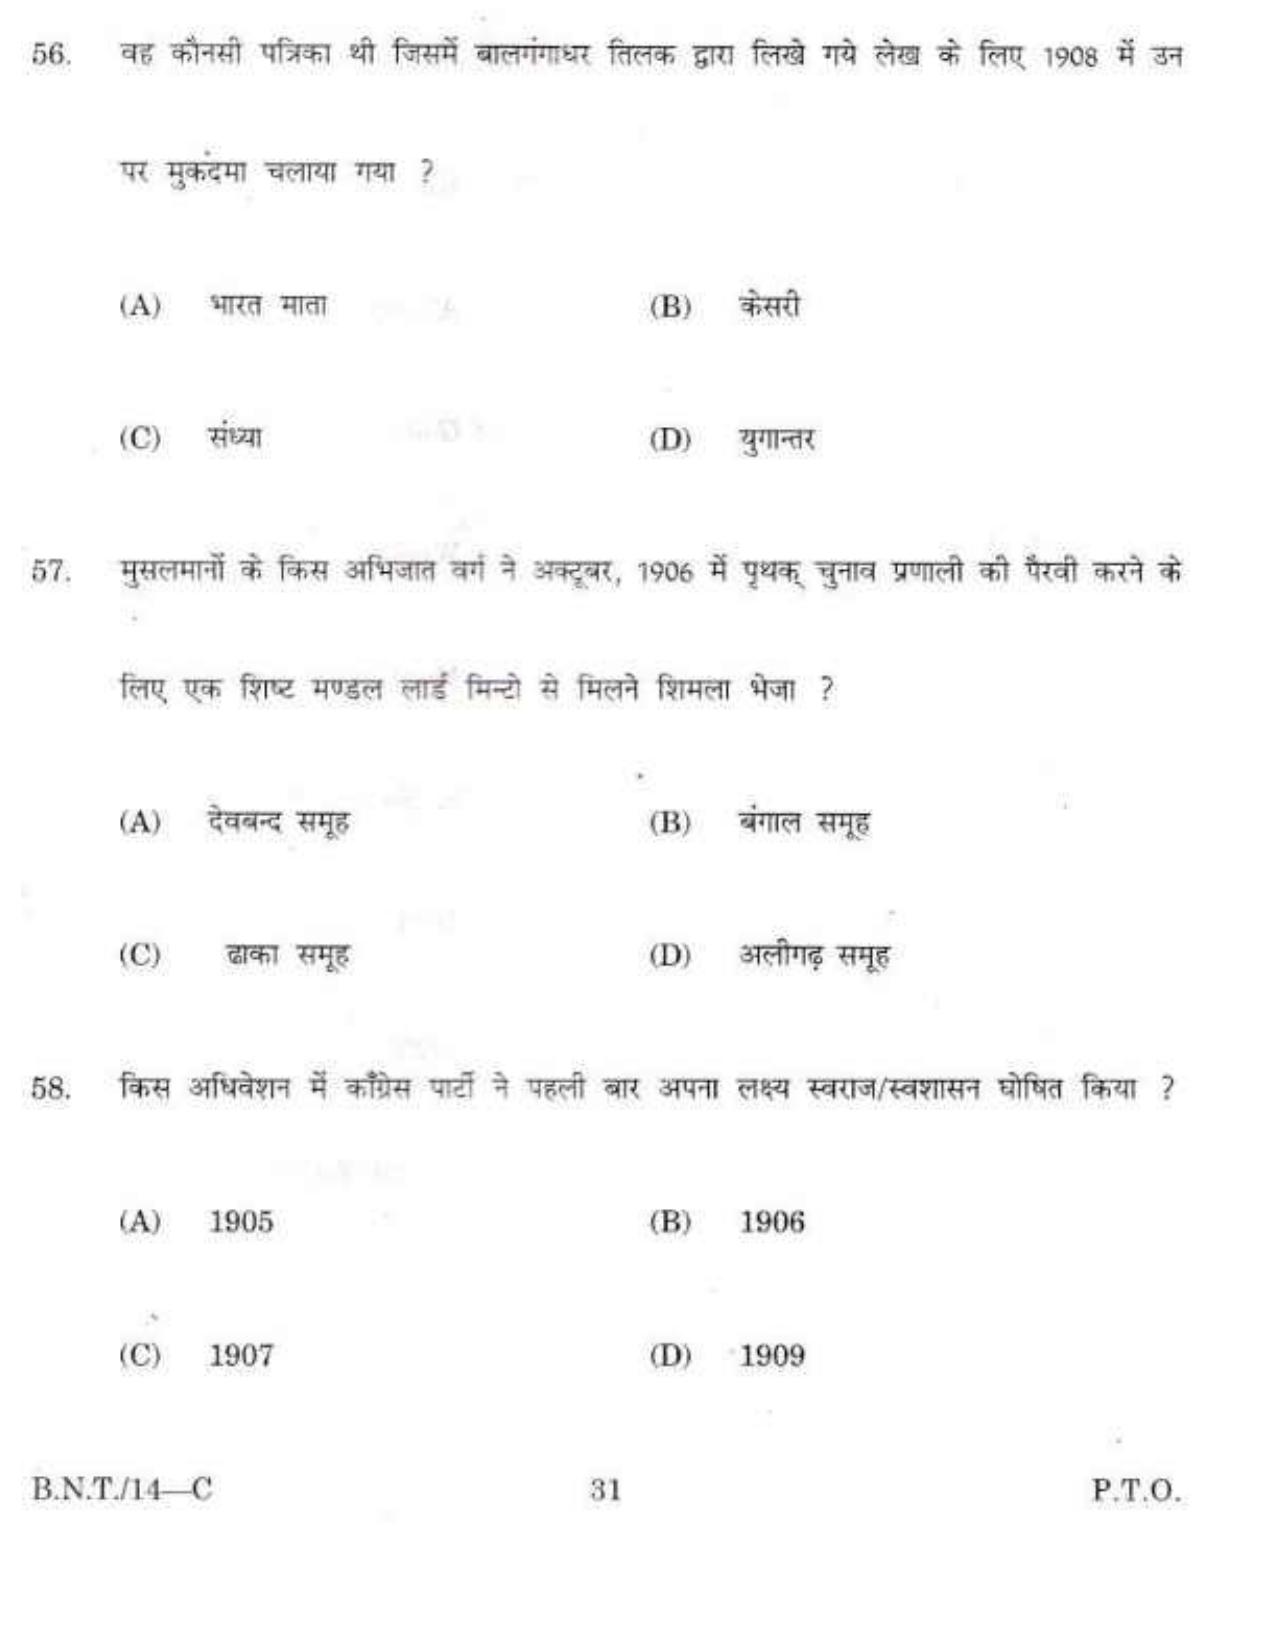 BSMFC Recovery Agent Old Question Papers for General Knowledge - Page 31